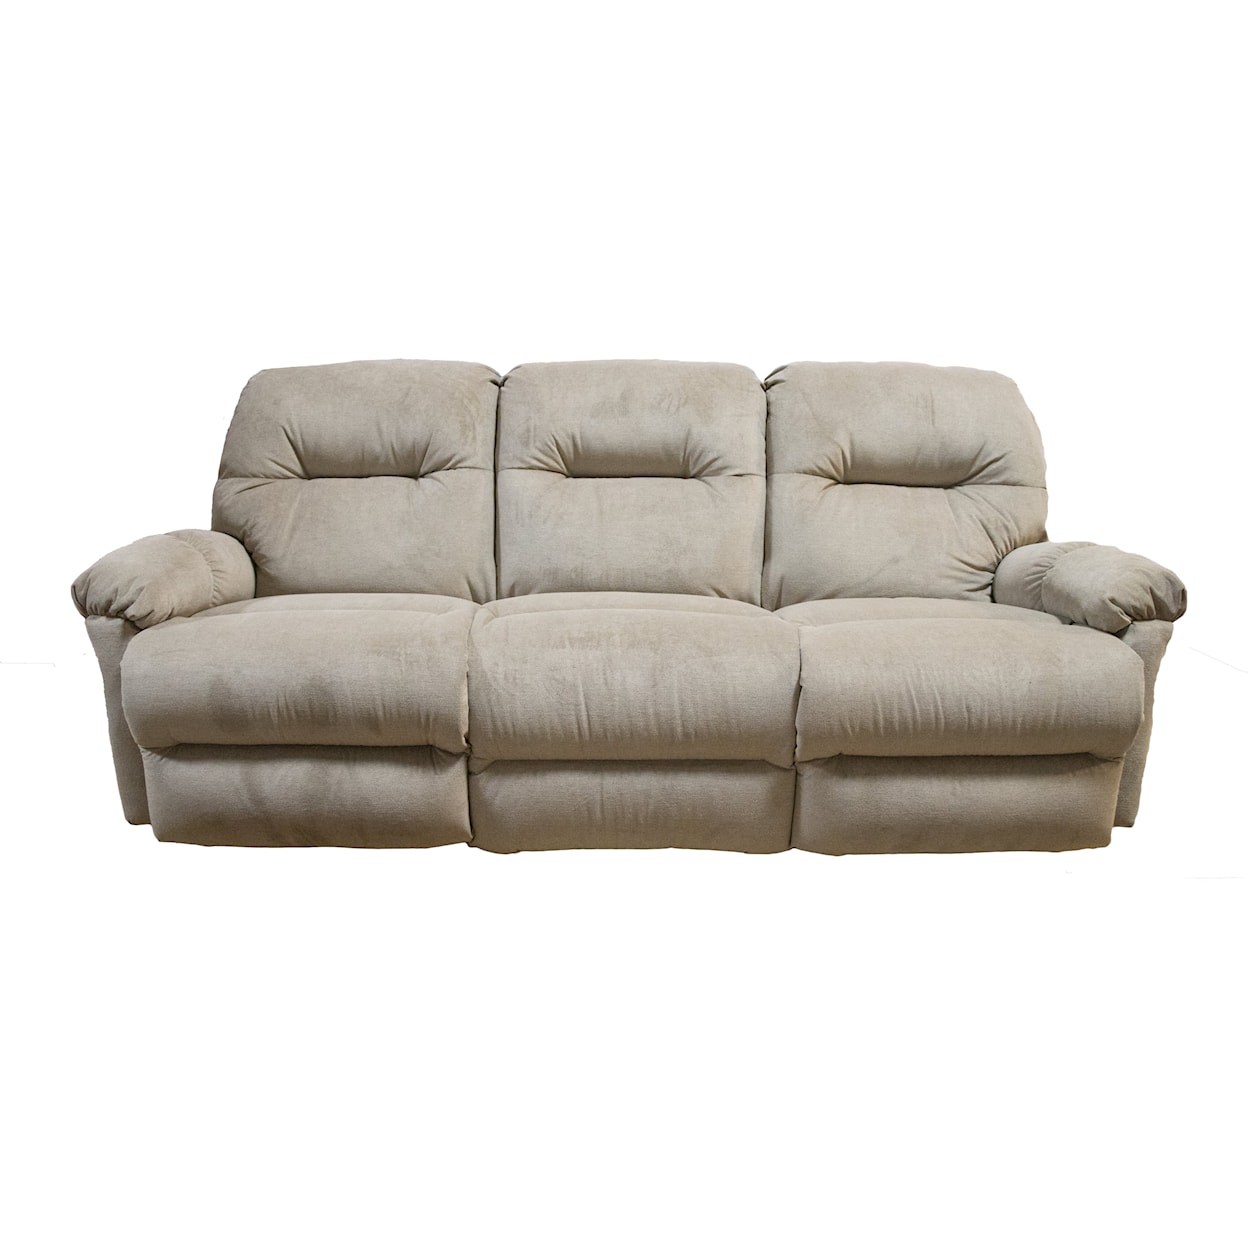 Best Home Furnishings Ellisport Reclining Sofa with Rolled Arms